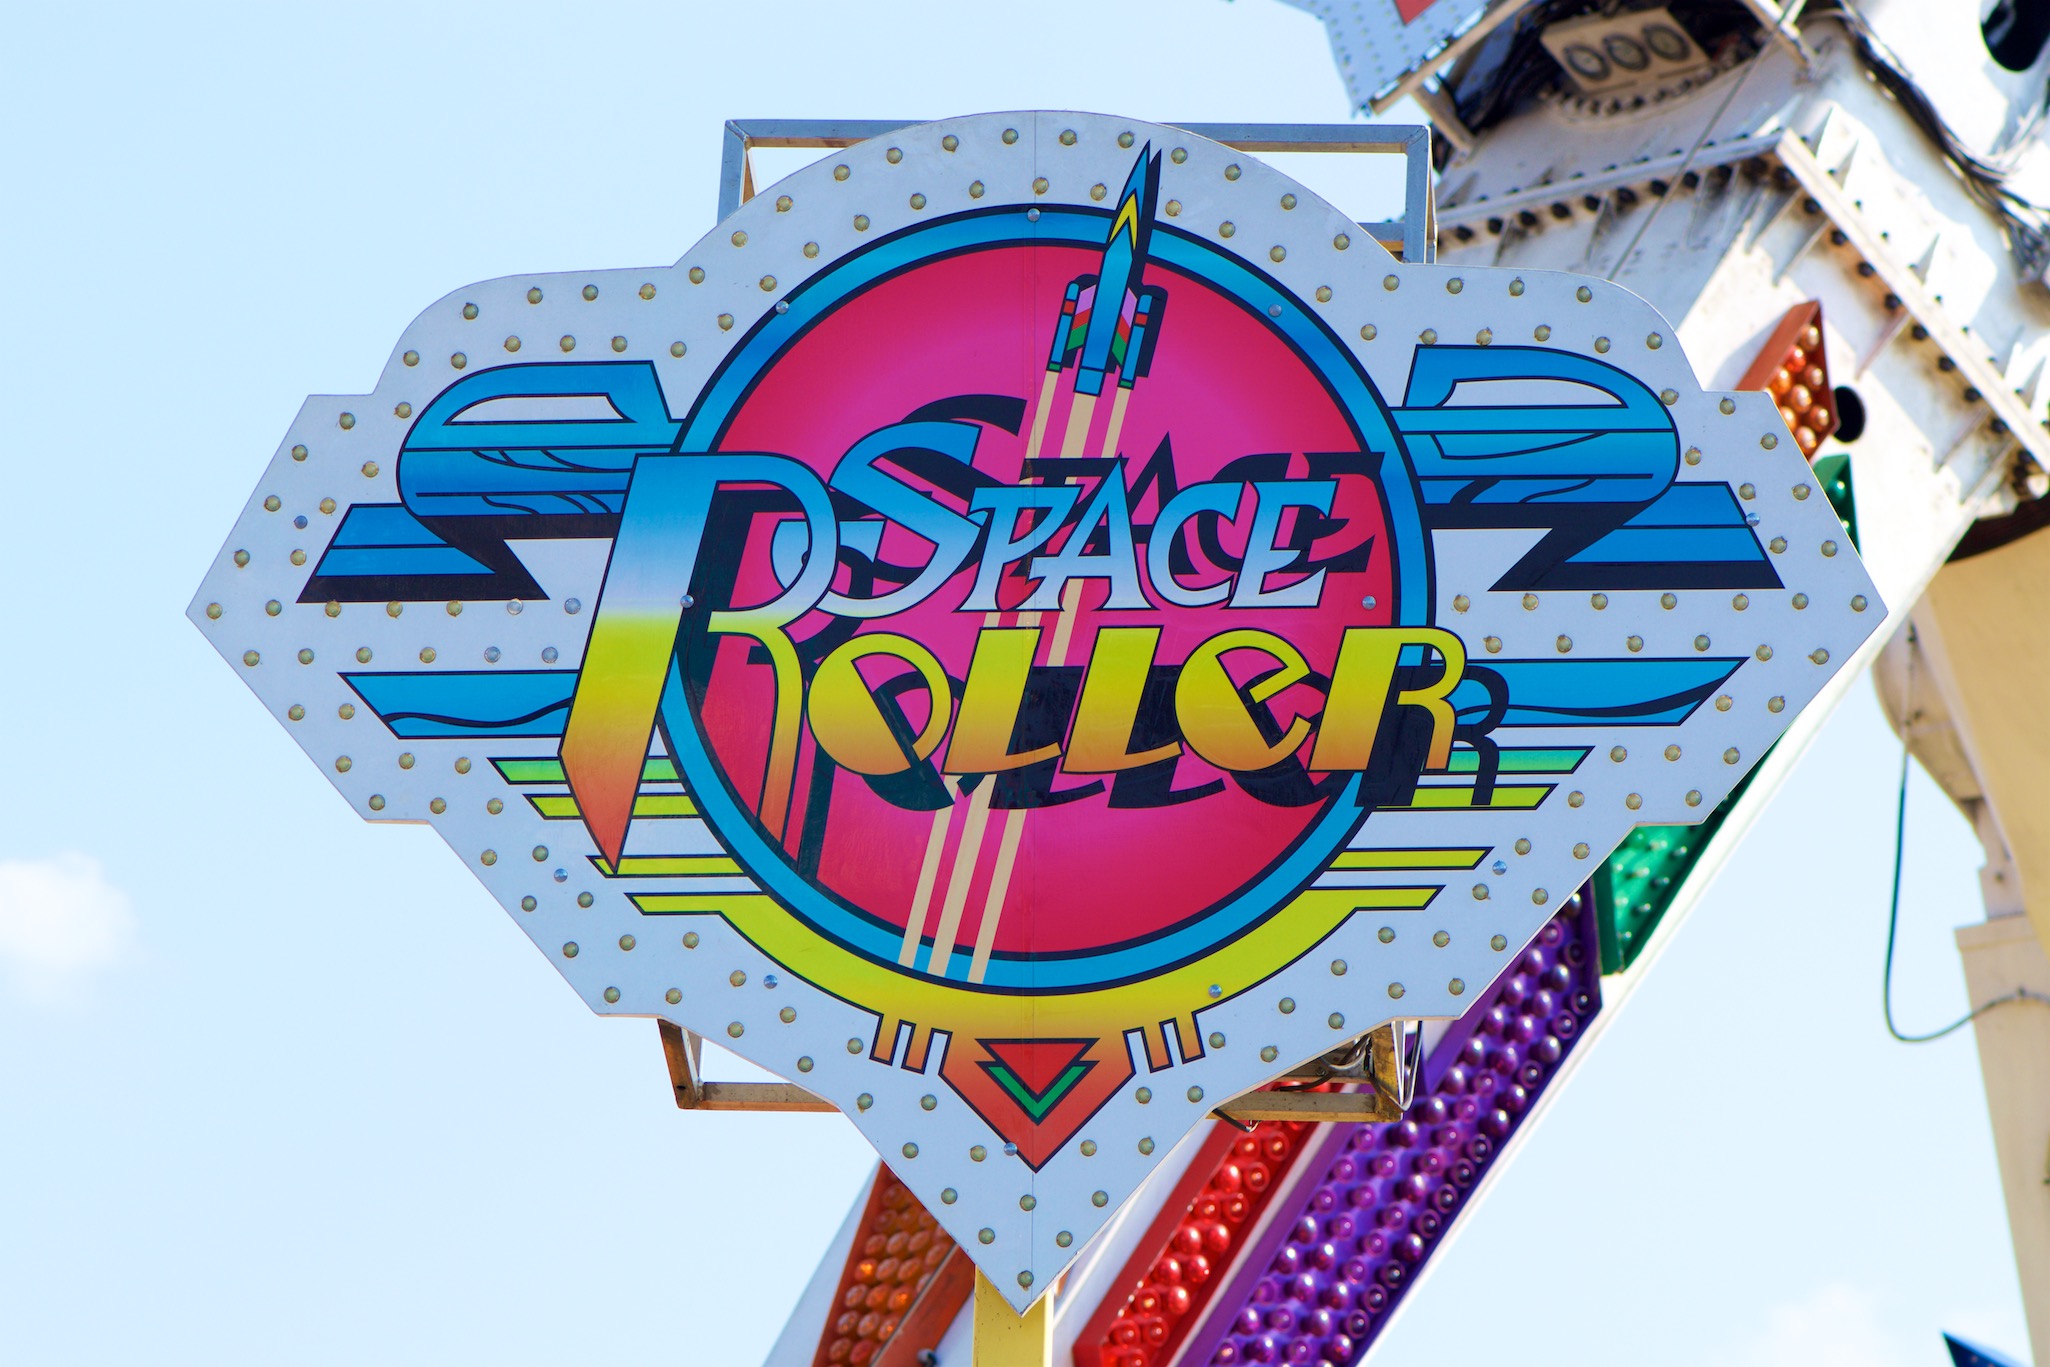 Space Roller Ride at the New York State Fair in Syracuse, New York